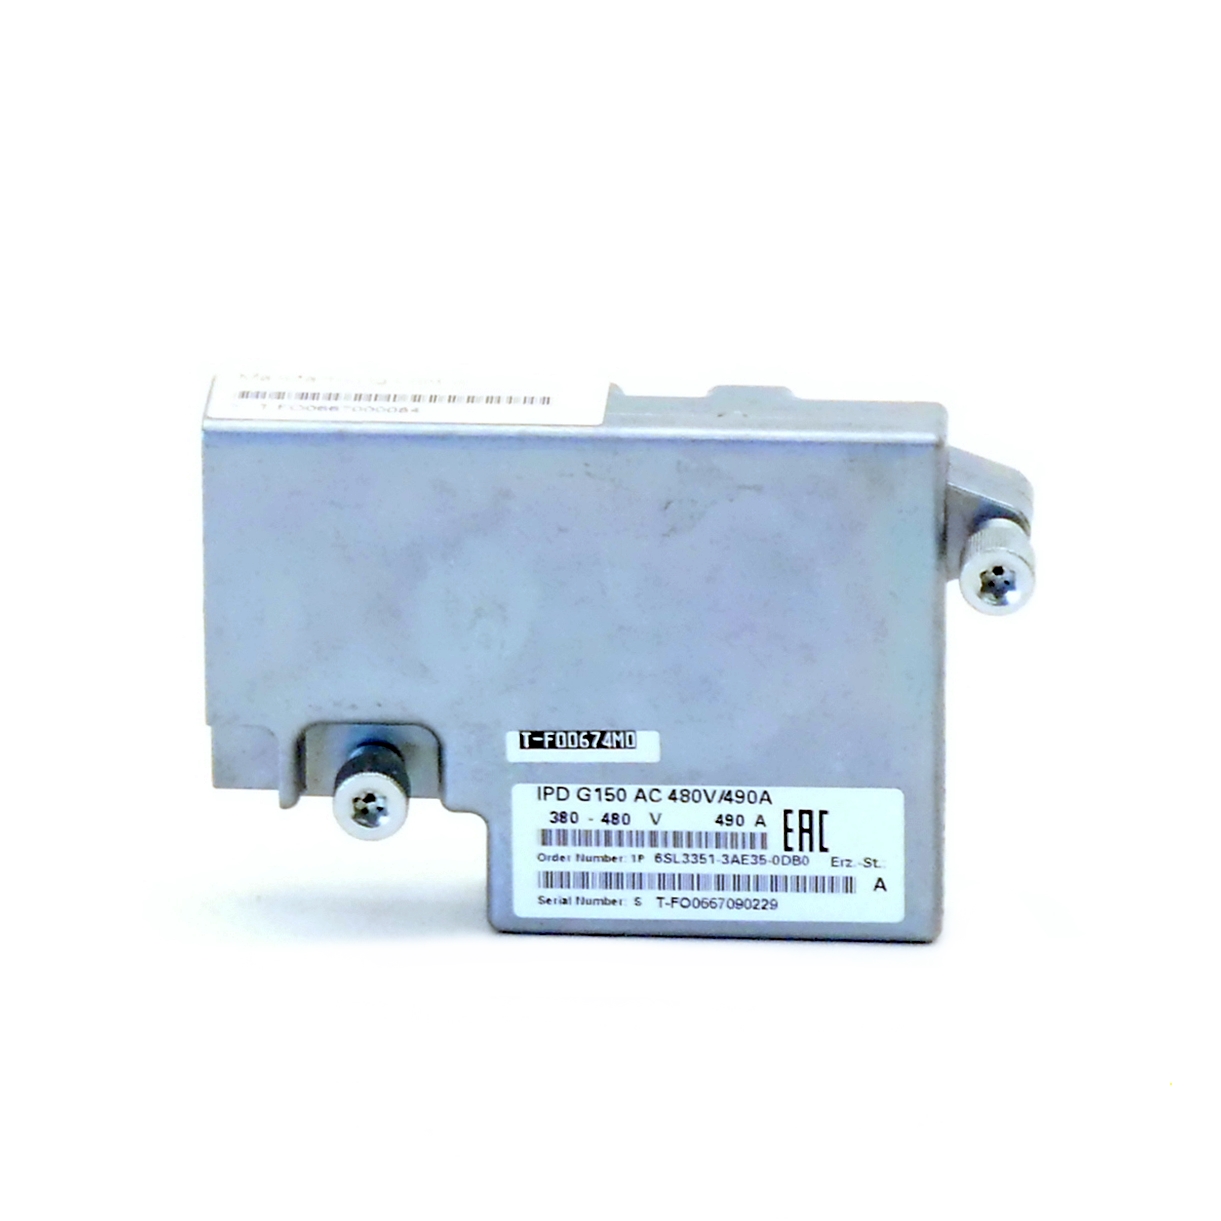 Replacement Card IPD G150 